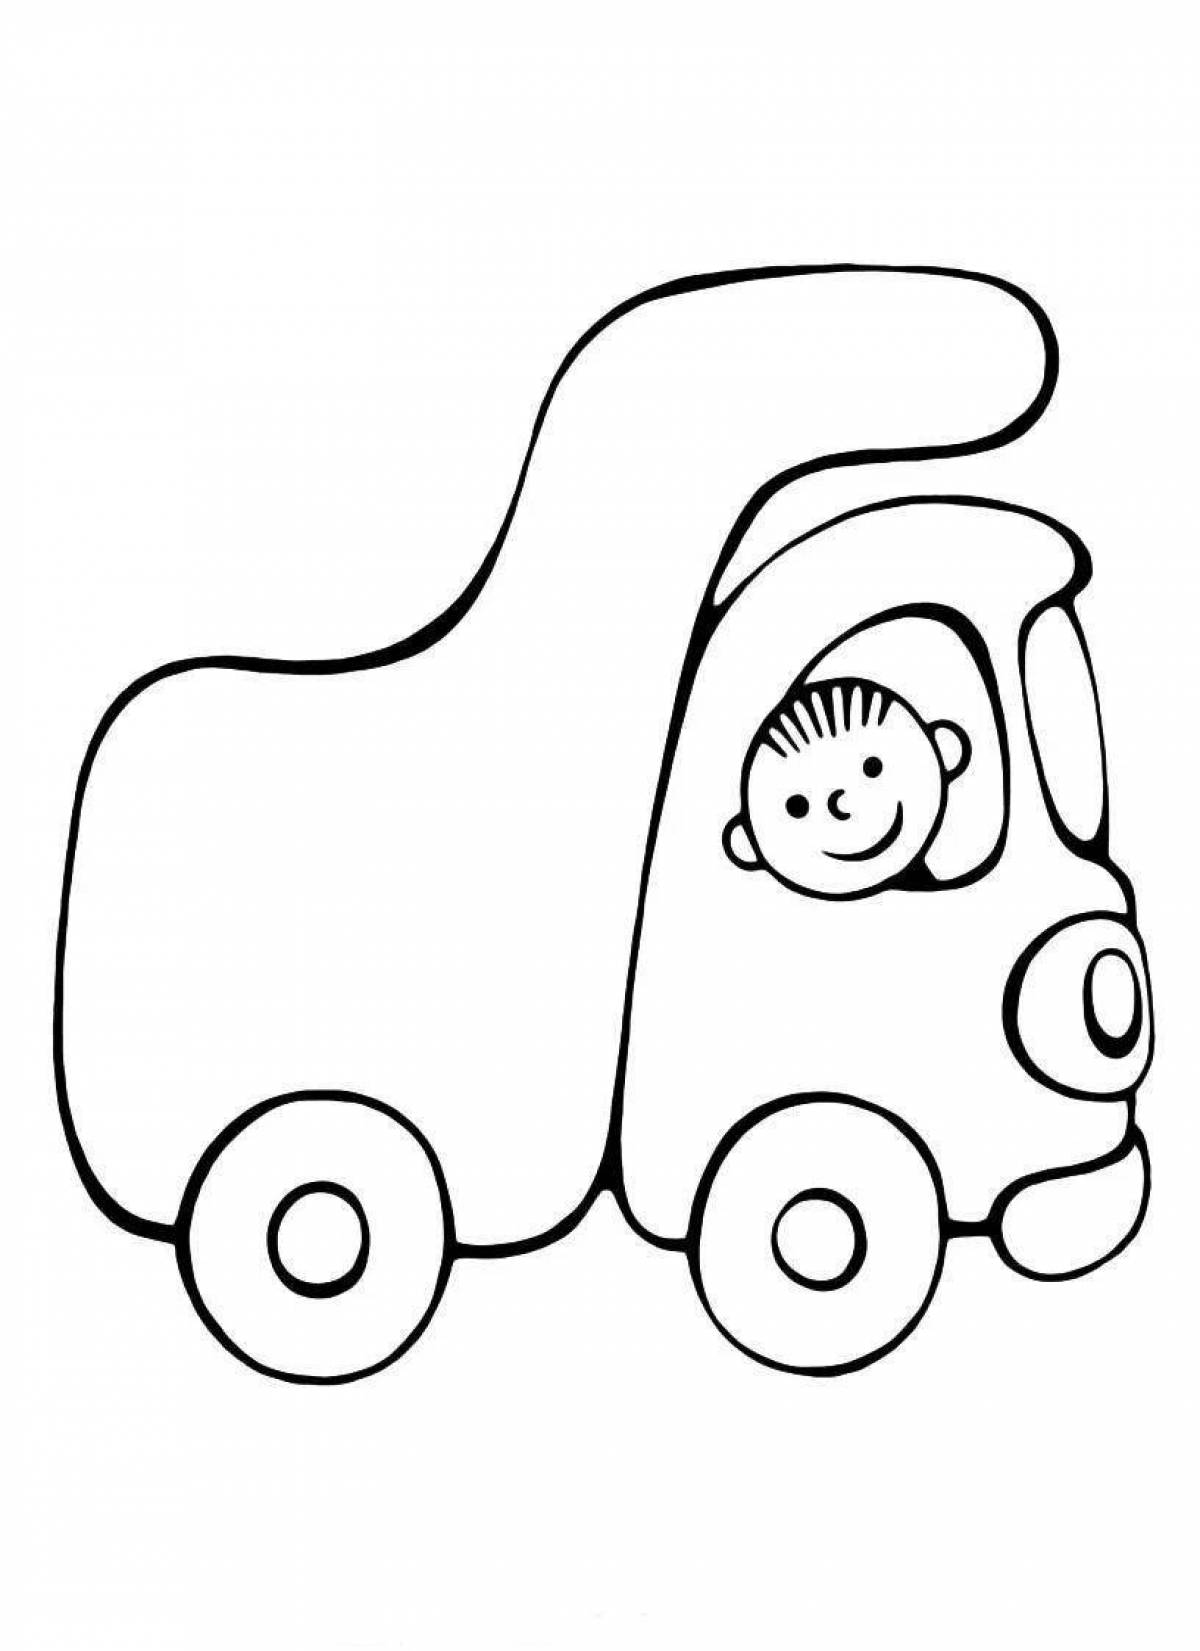 Amazing car coloring pages for kids 2 3